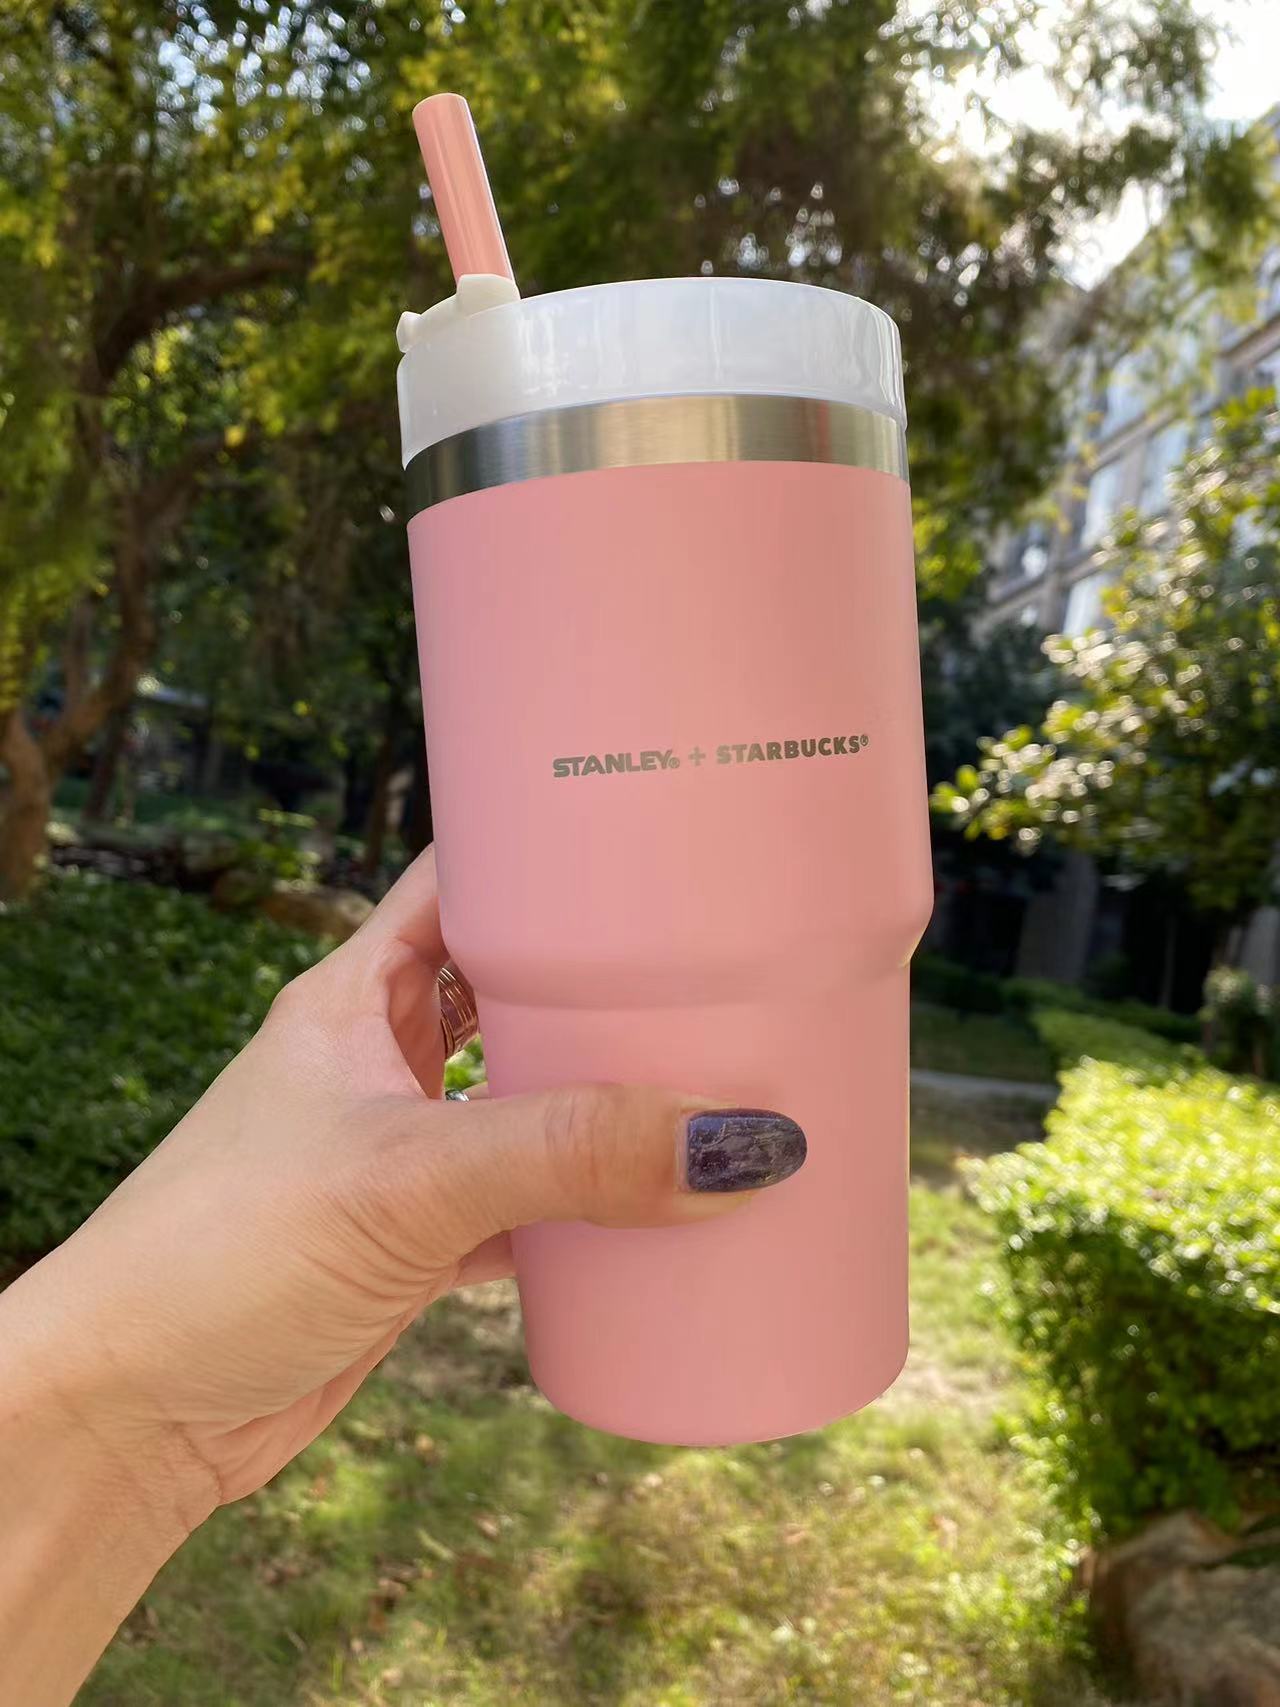 We found the Starbucks x Stanley tumbler IN STOCK today! This